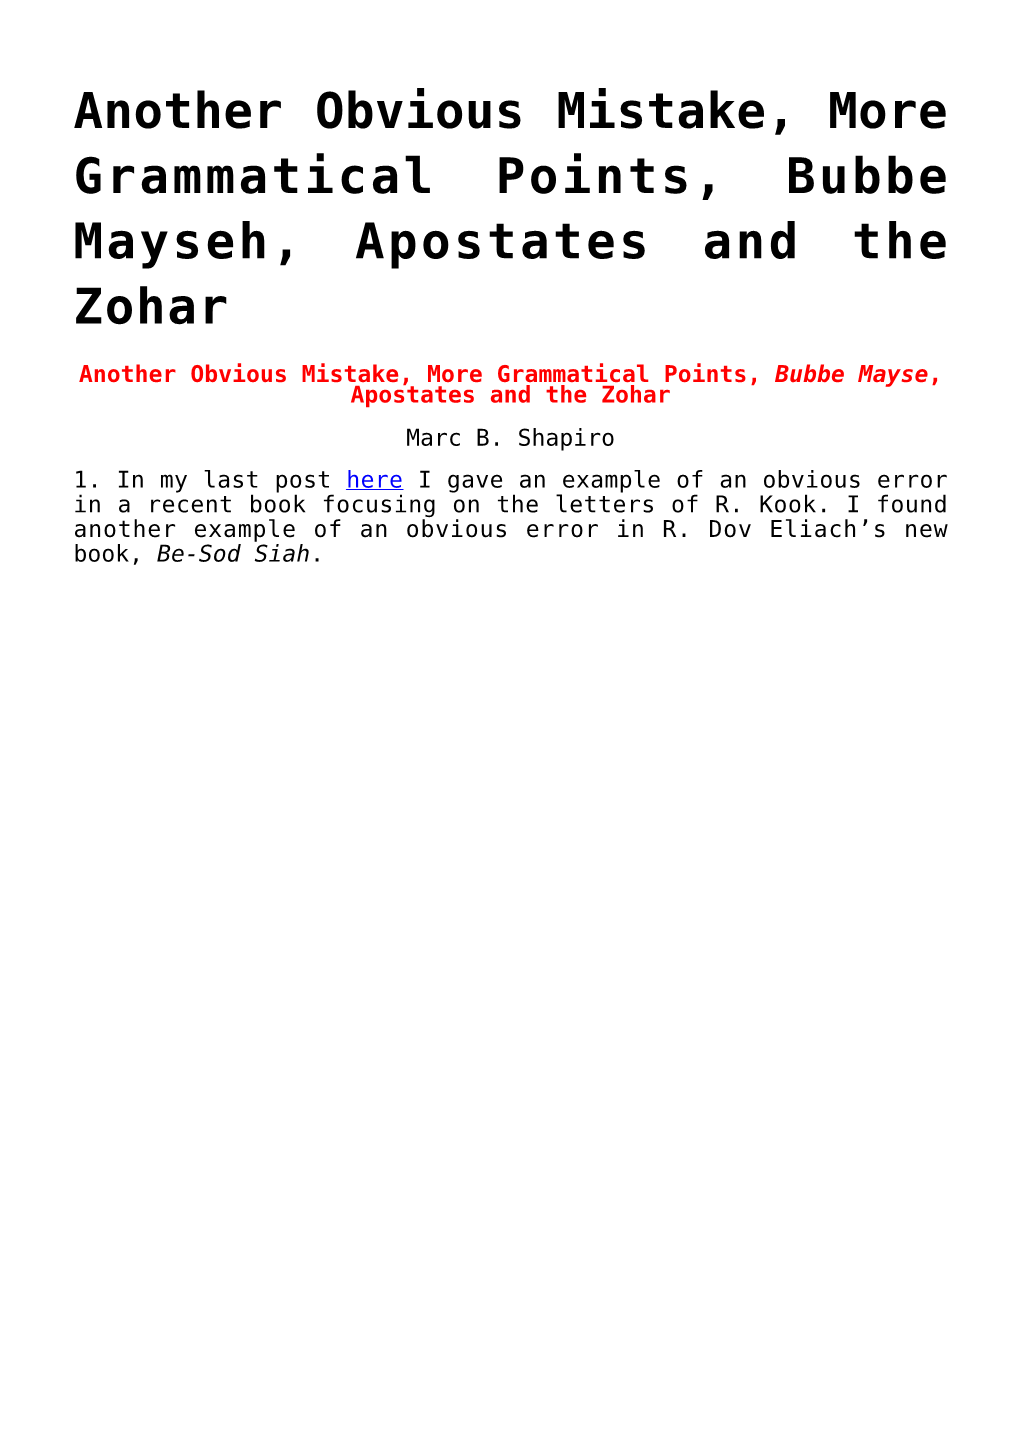 Another Obvious Mistake, More Grammatical Points, Bubbe Mayseh, Apostates and the Zohar